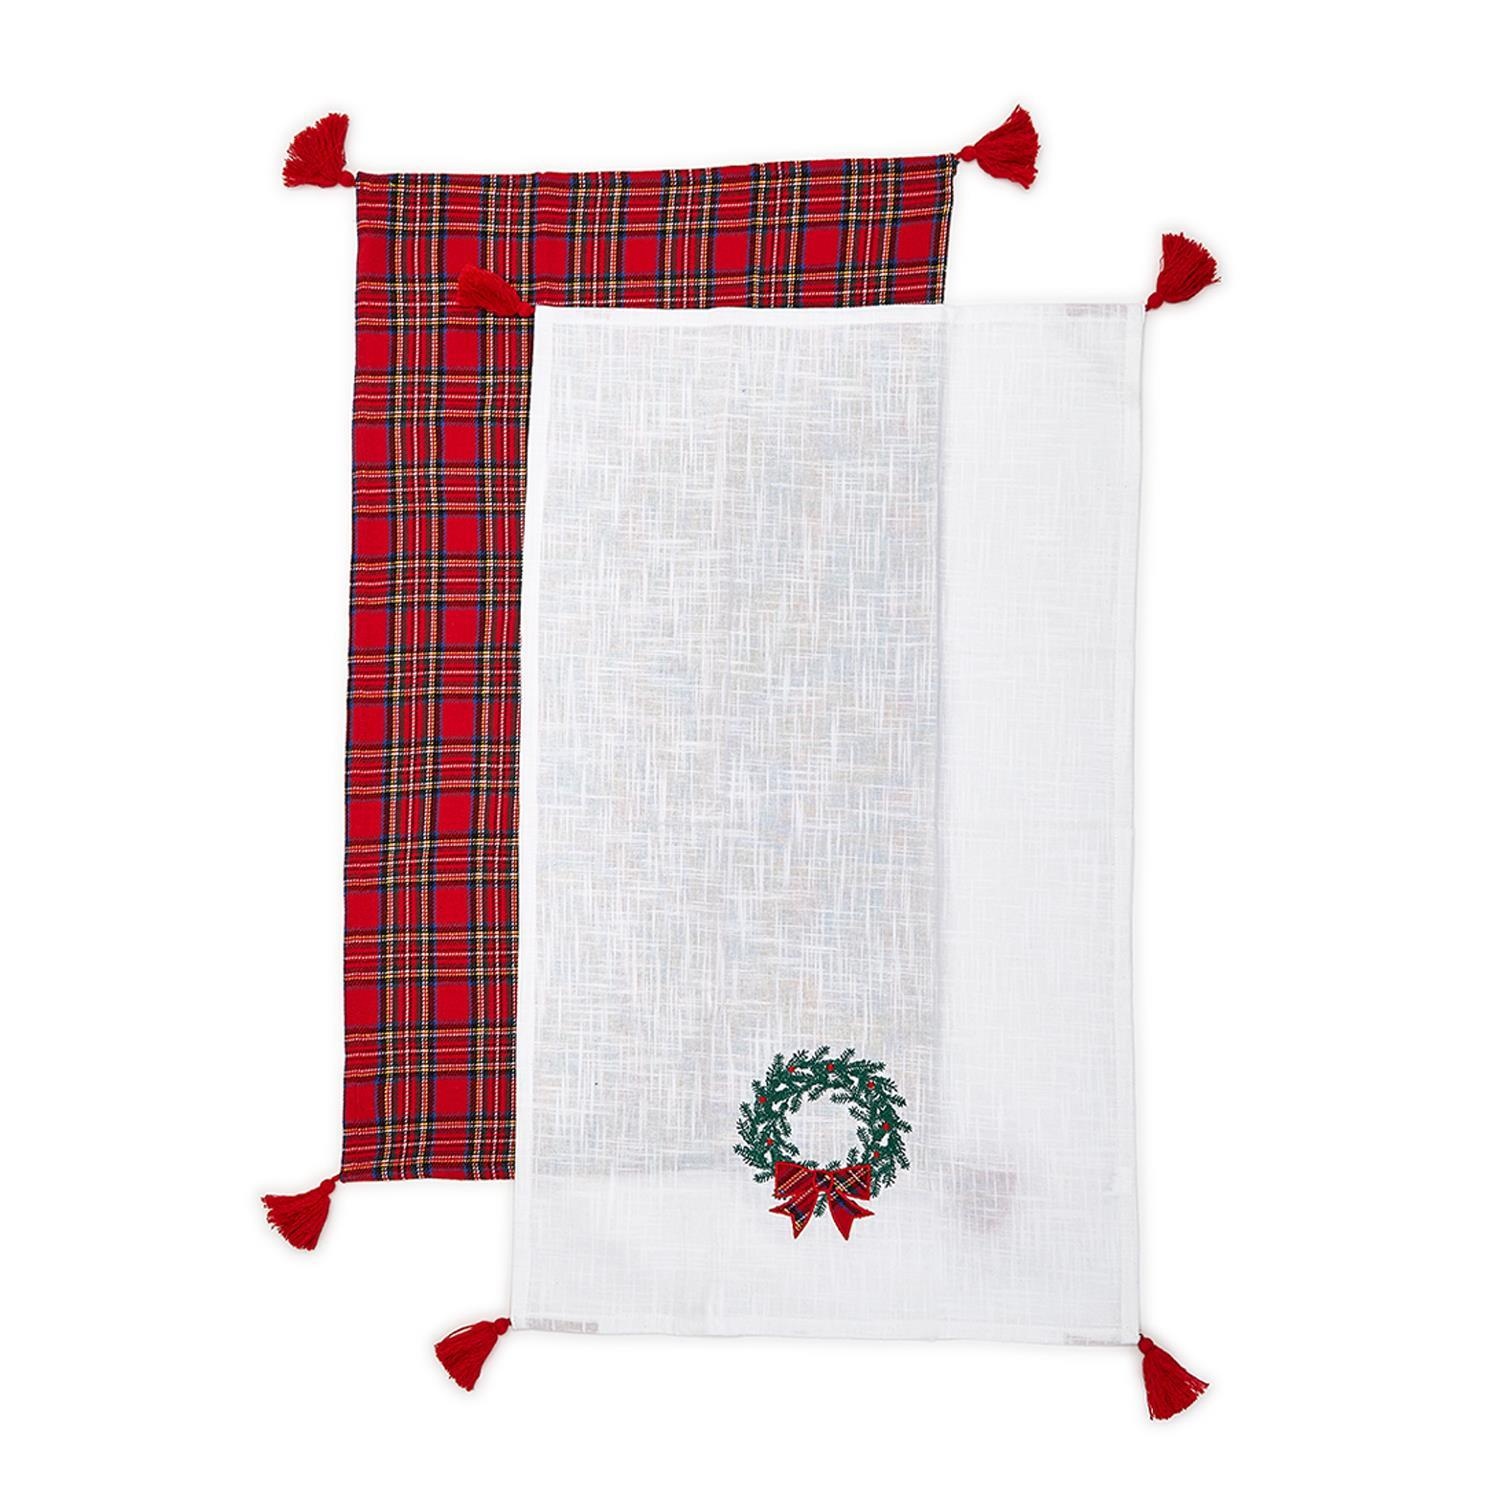 Two's Company Tartan and Traditions Set of 2 Dish Towels with Decorative Tassels